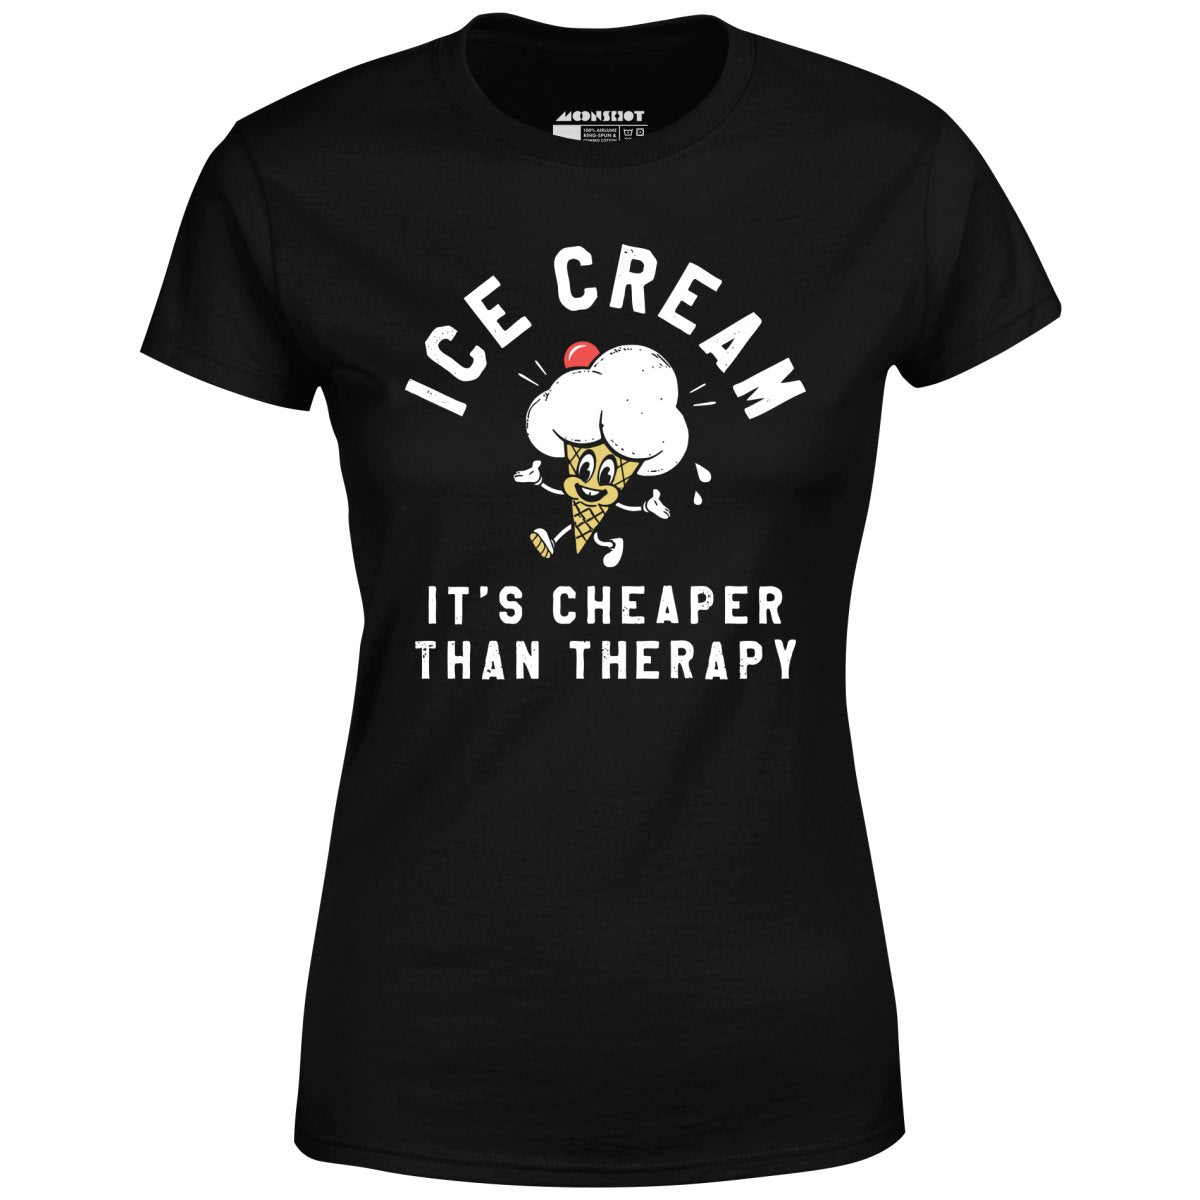 Ice Cream It's Cheaper Than Therapy - Women's T-Shirt